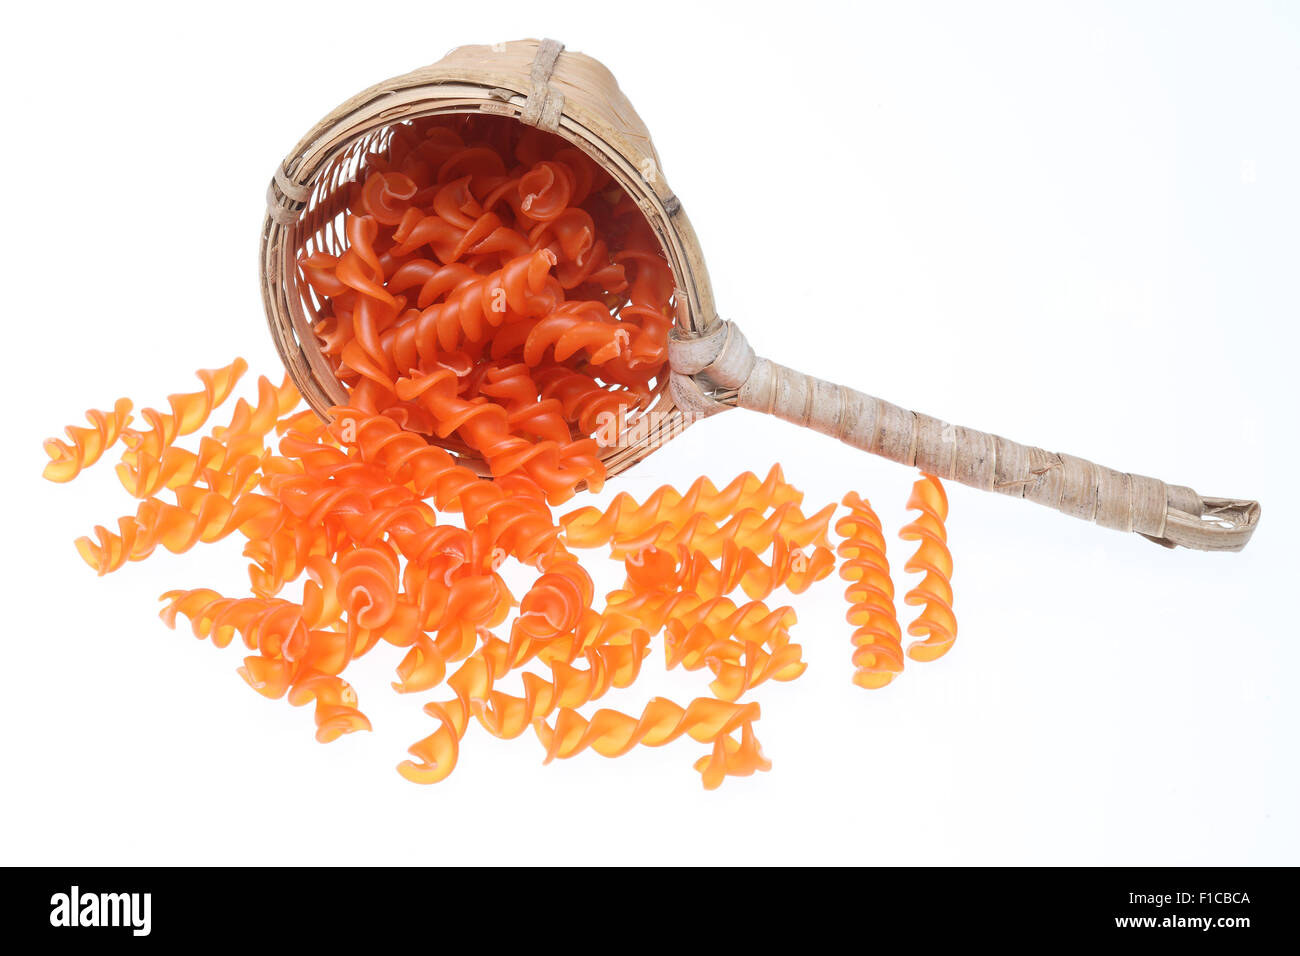 Noodles made from the flour of red lentils Stock Photo